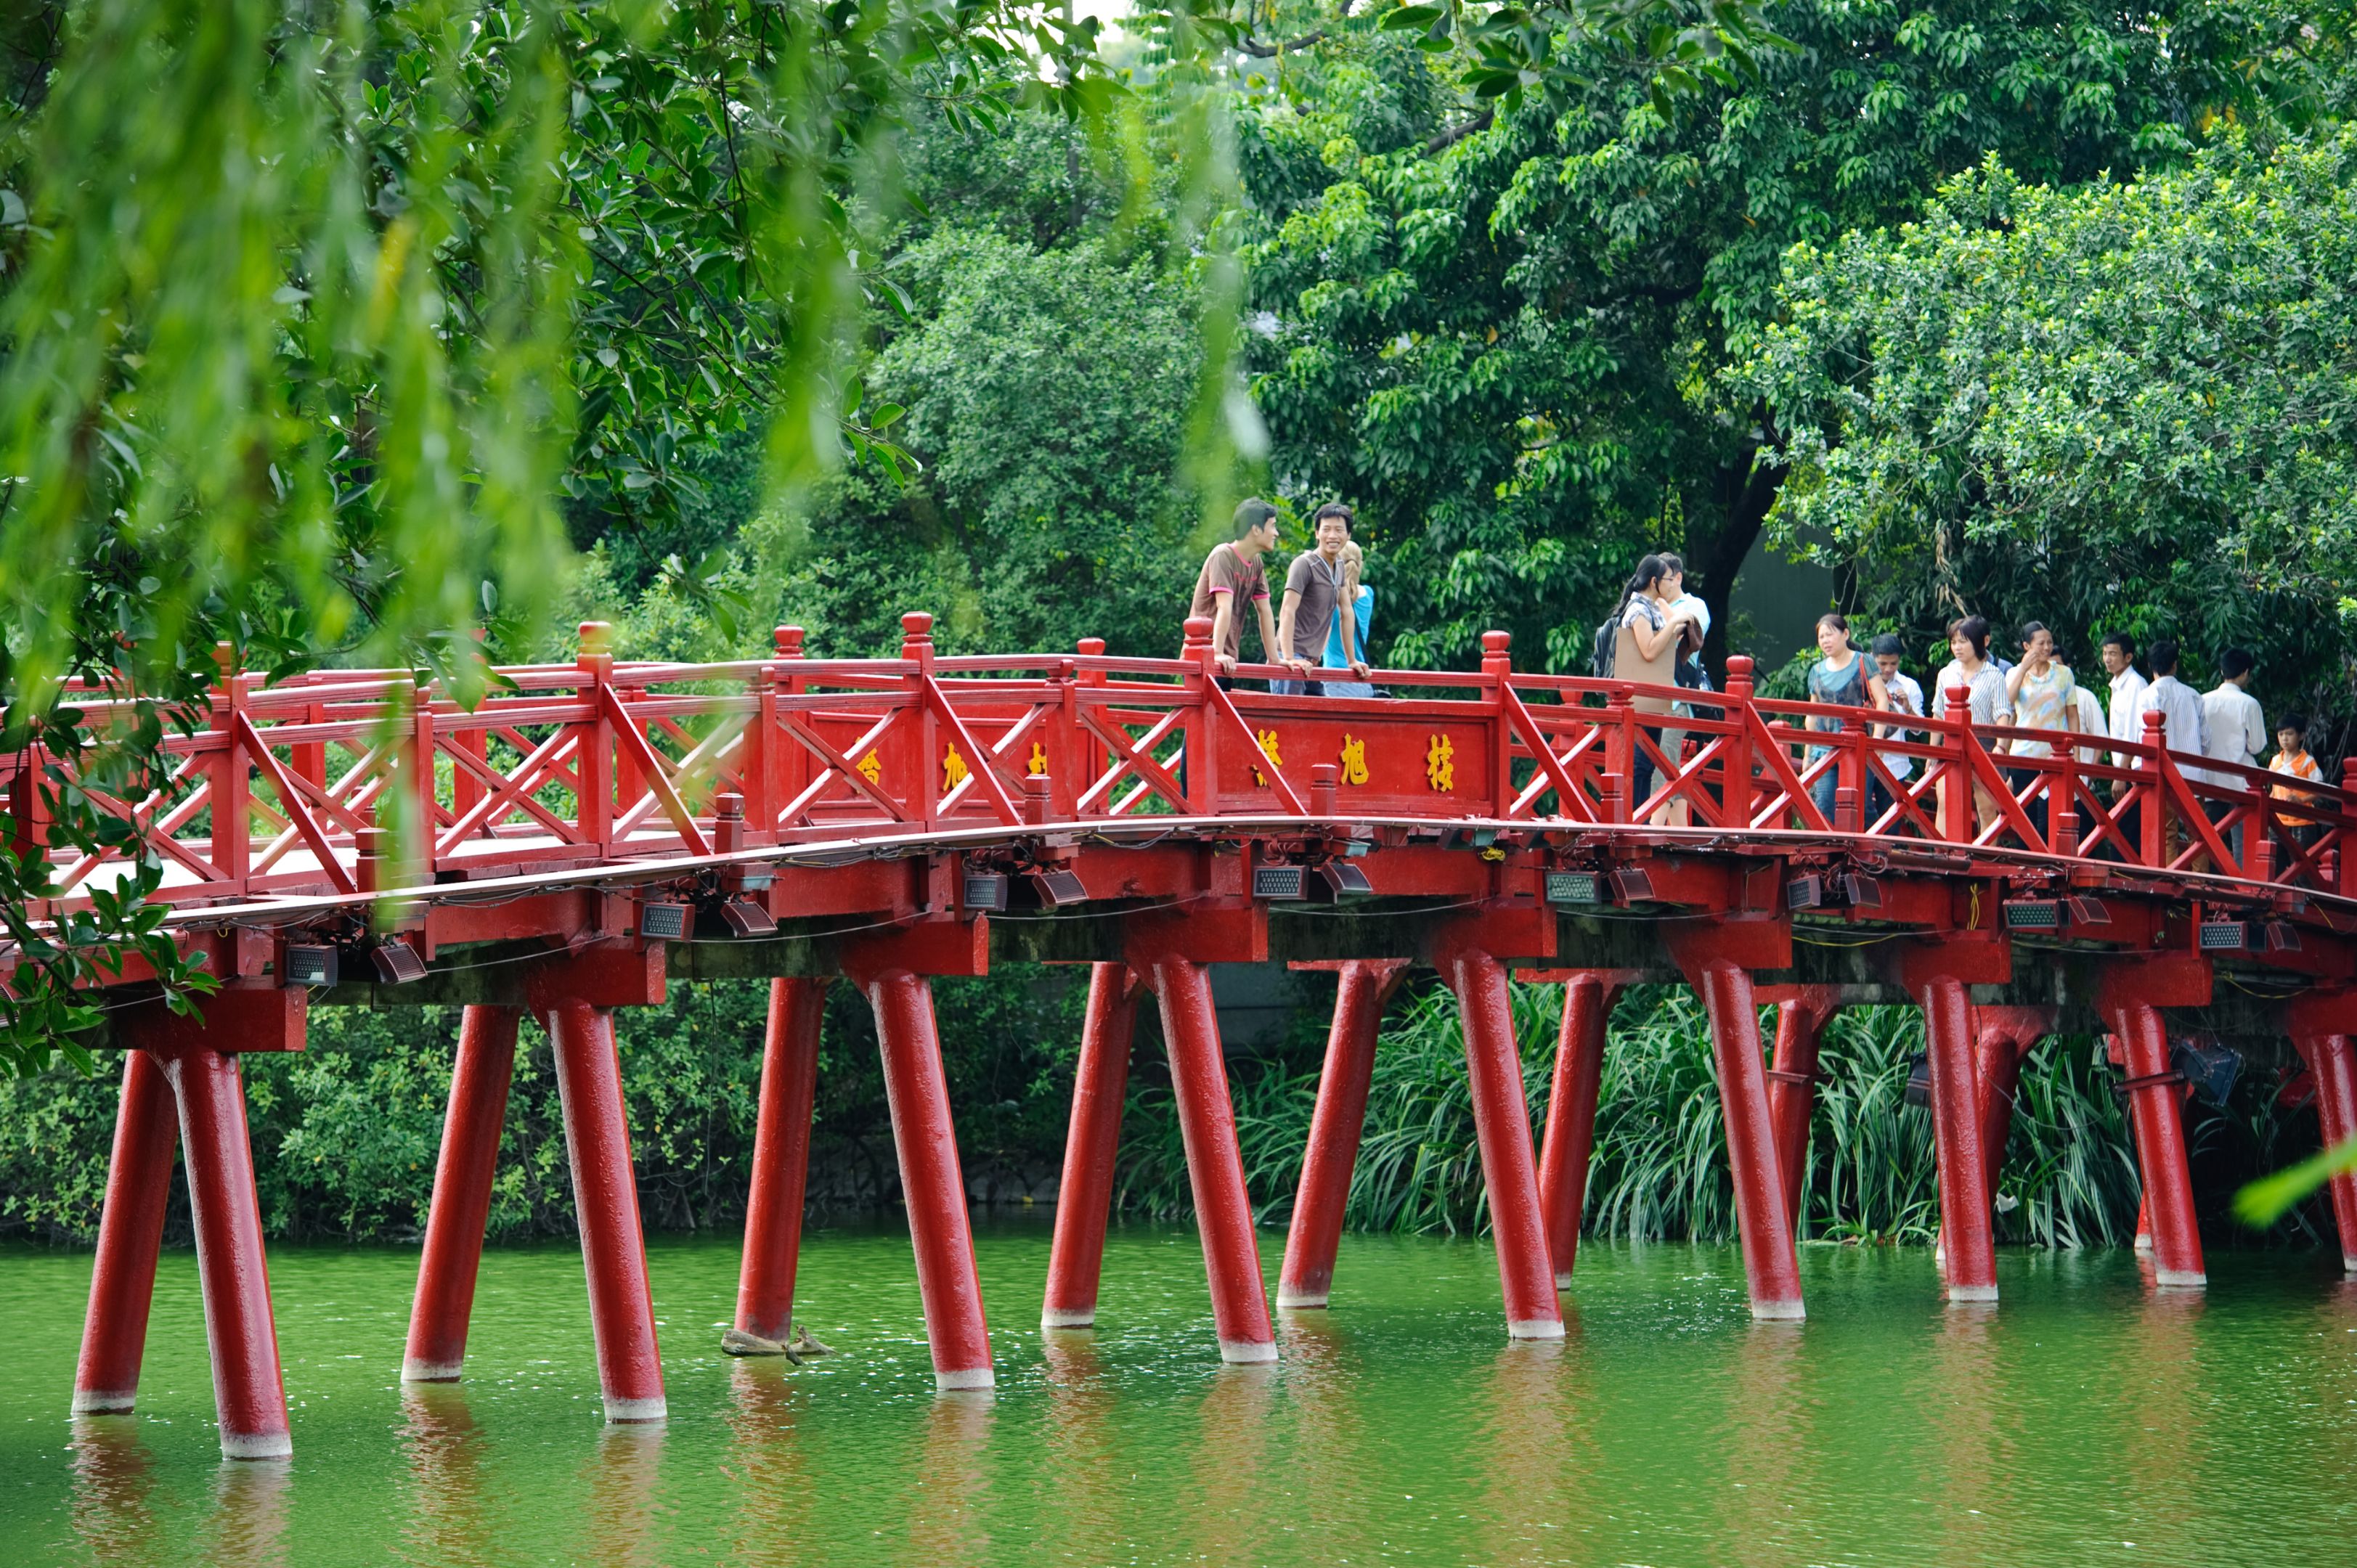 Hanoi red bridge. The wooden red painted bridge over the Hoan Kiem Lake connects the shore and the Jade Island on which Ngoc Son Temple stands